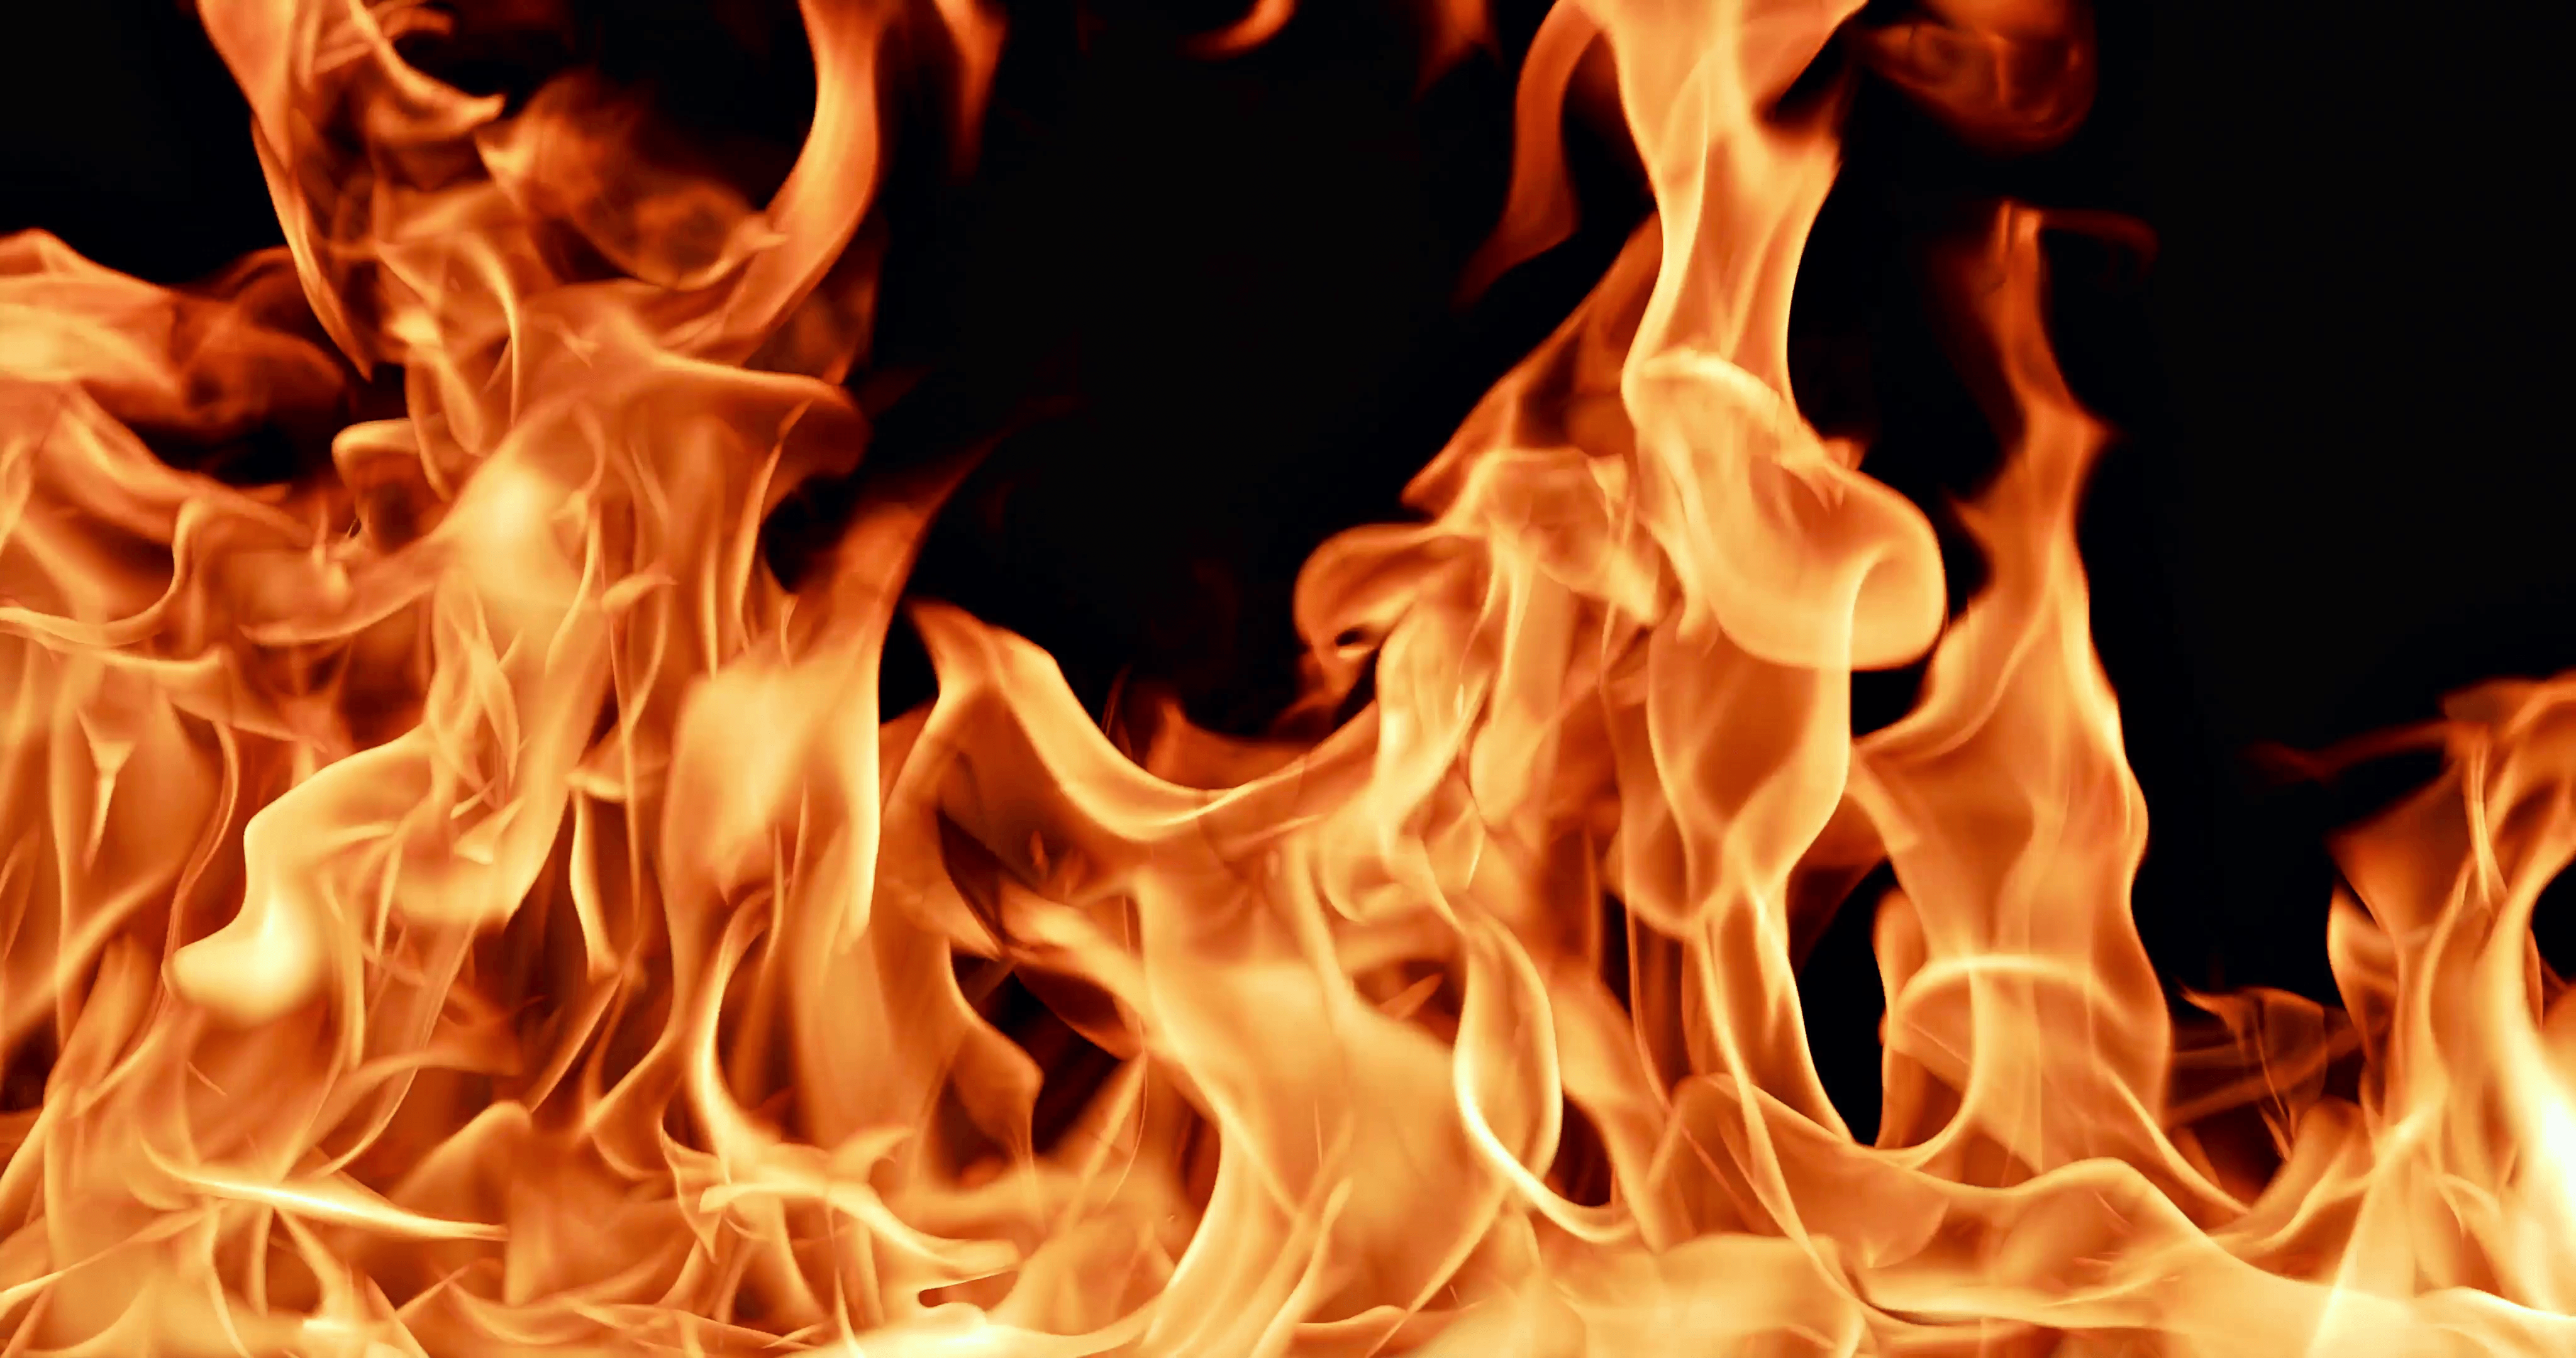 Fire Png Image With Transparent Background  Fire Png  Full Size PNG  Download  SeekPNG